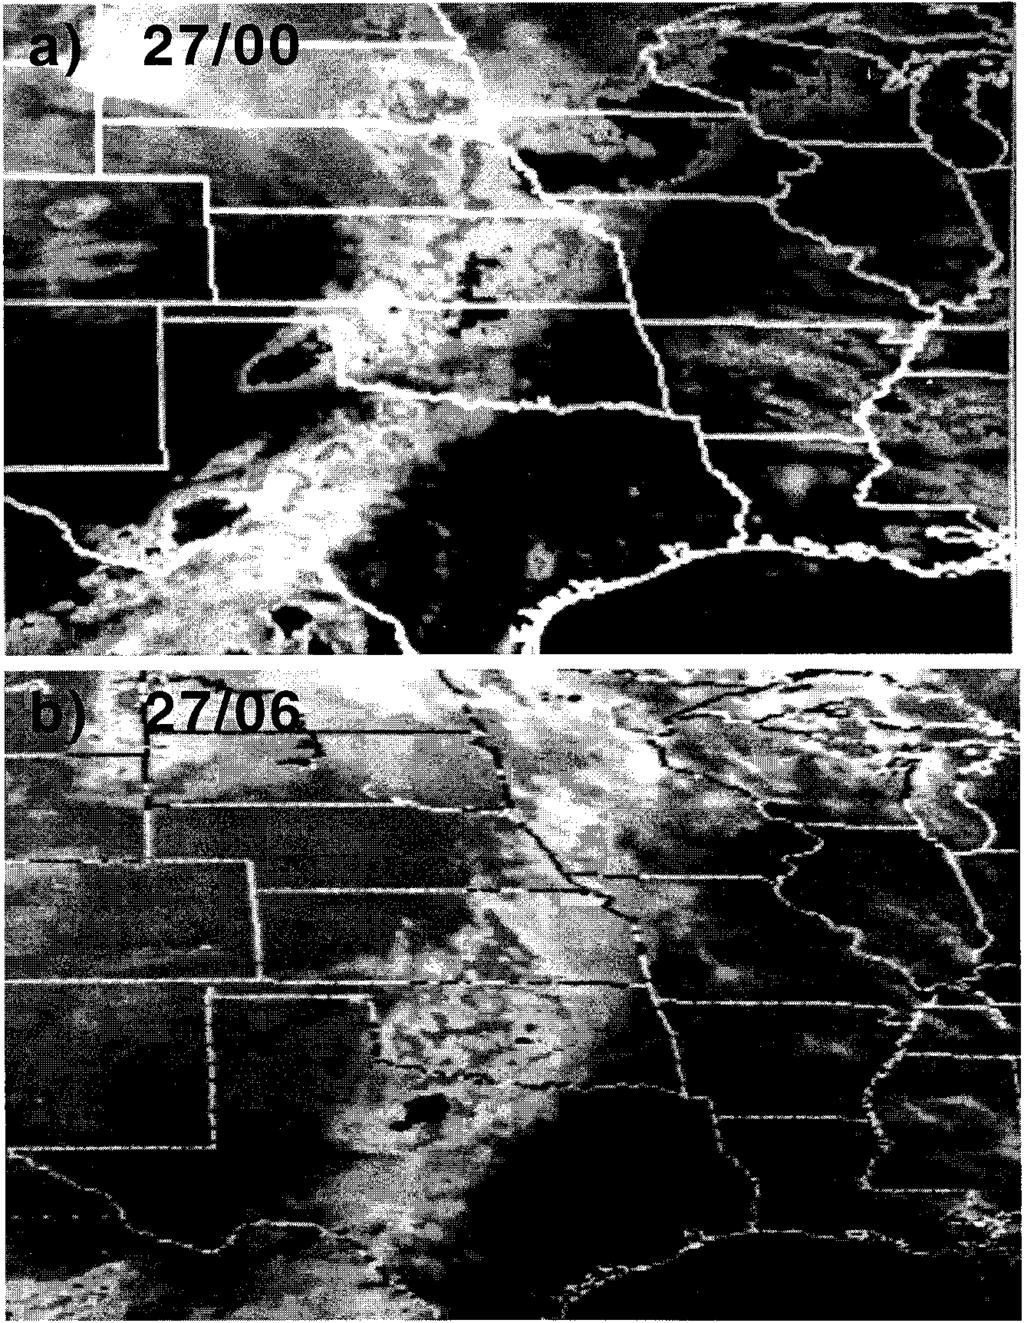 OCTOBER 1997 BÉLAIR AND ZHANG 2549 FIG. 5. Satellite infrared imagery at (a) 0000 UTC and (b) 0600 UTC 27 June 1985.